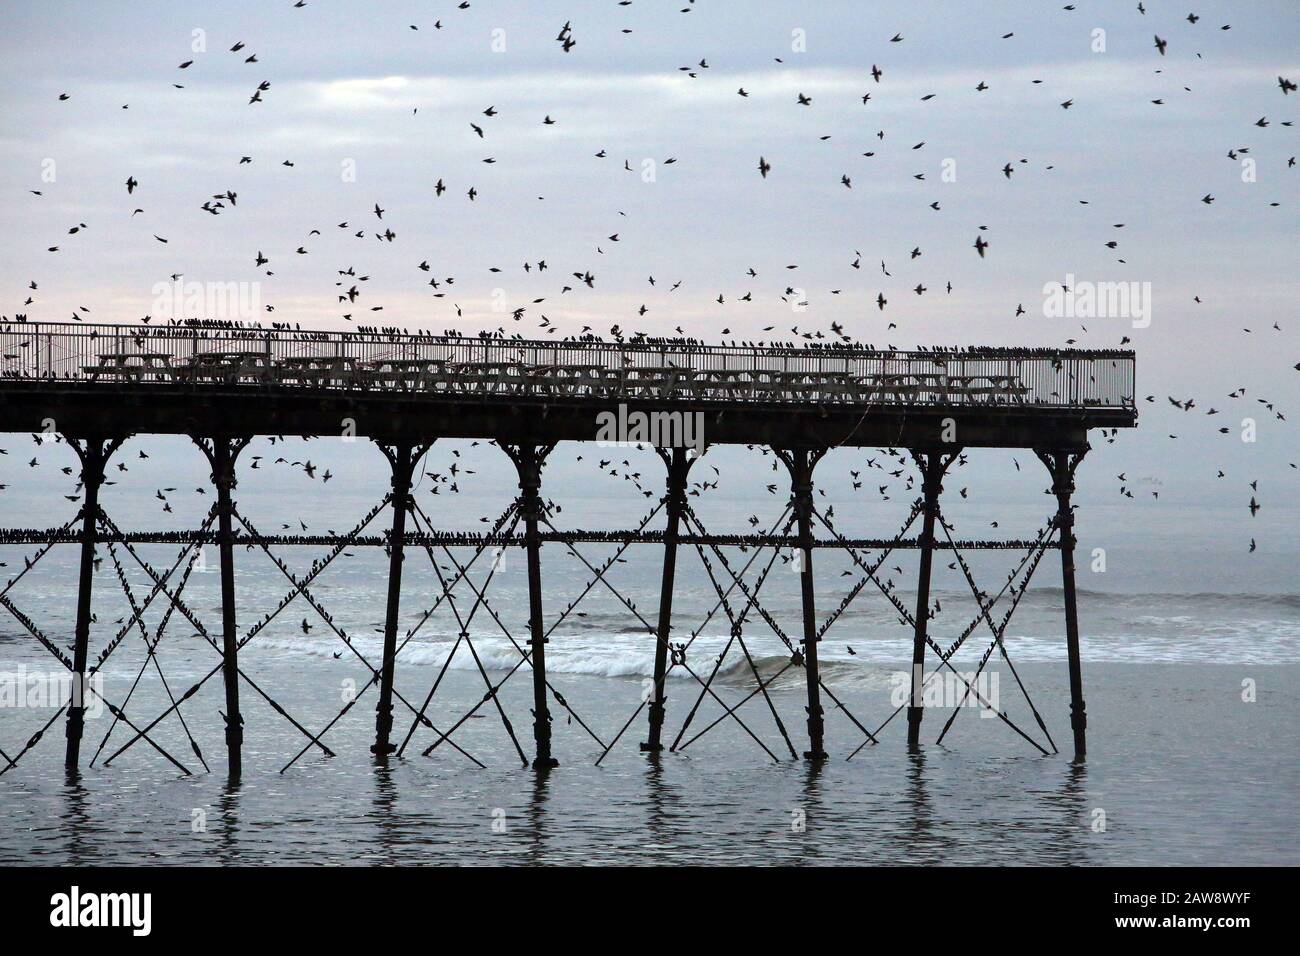 A murmuration of Starlings are pictured settling on Aberystwyth pier at dusk in the town of Aberystwyth, Wales Stock Photo